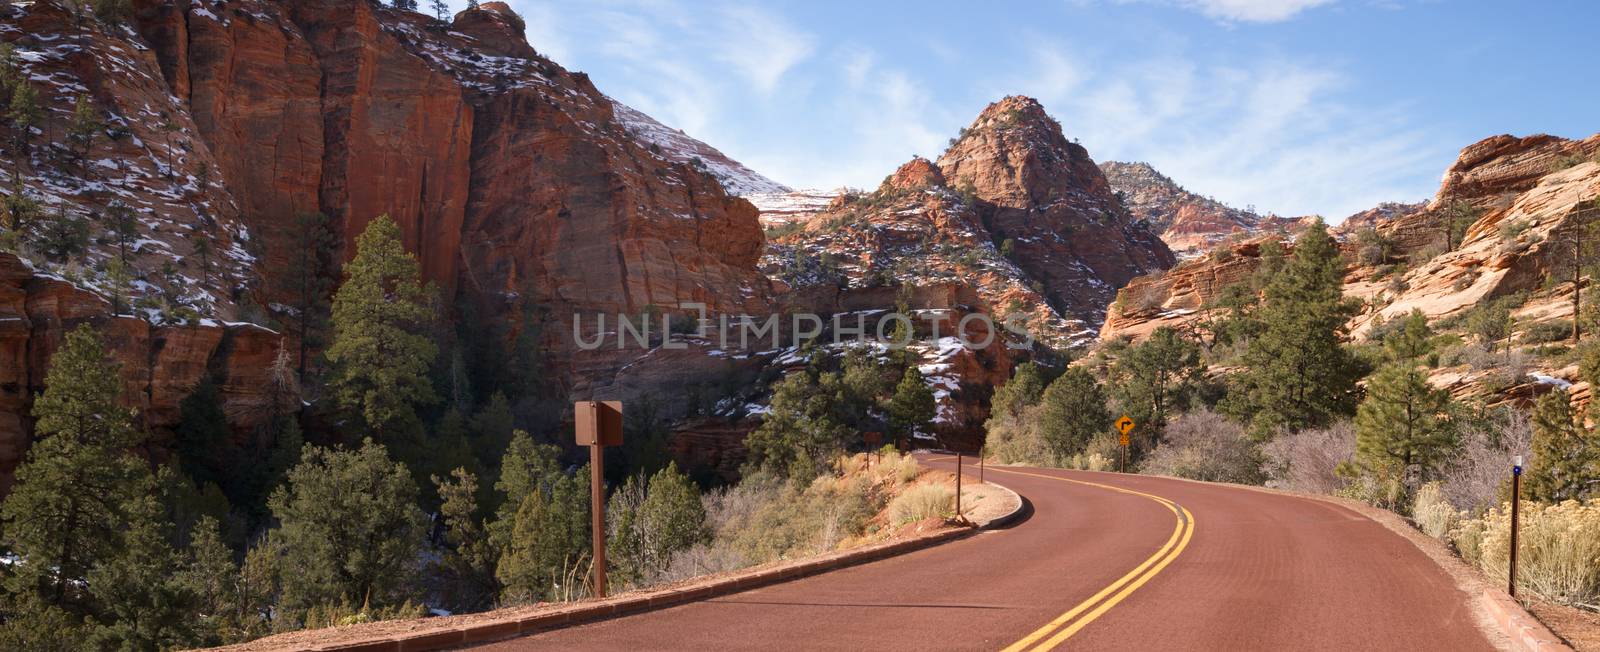 The road winds through canyons of Zion National Park